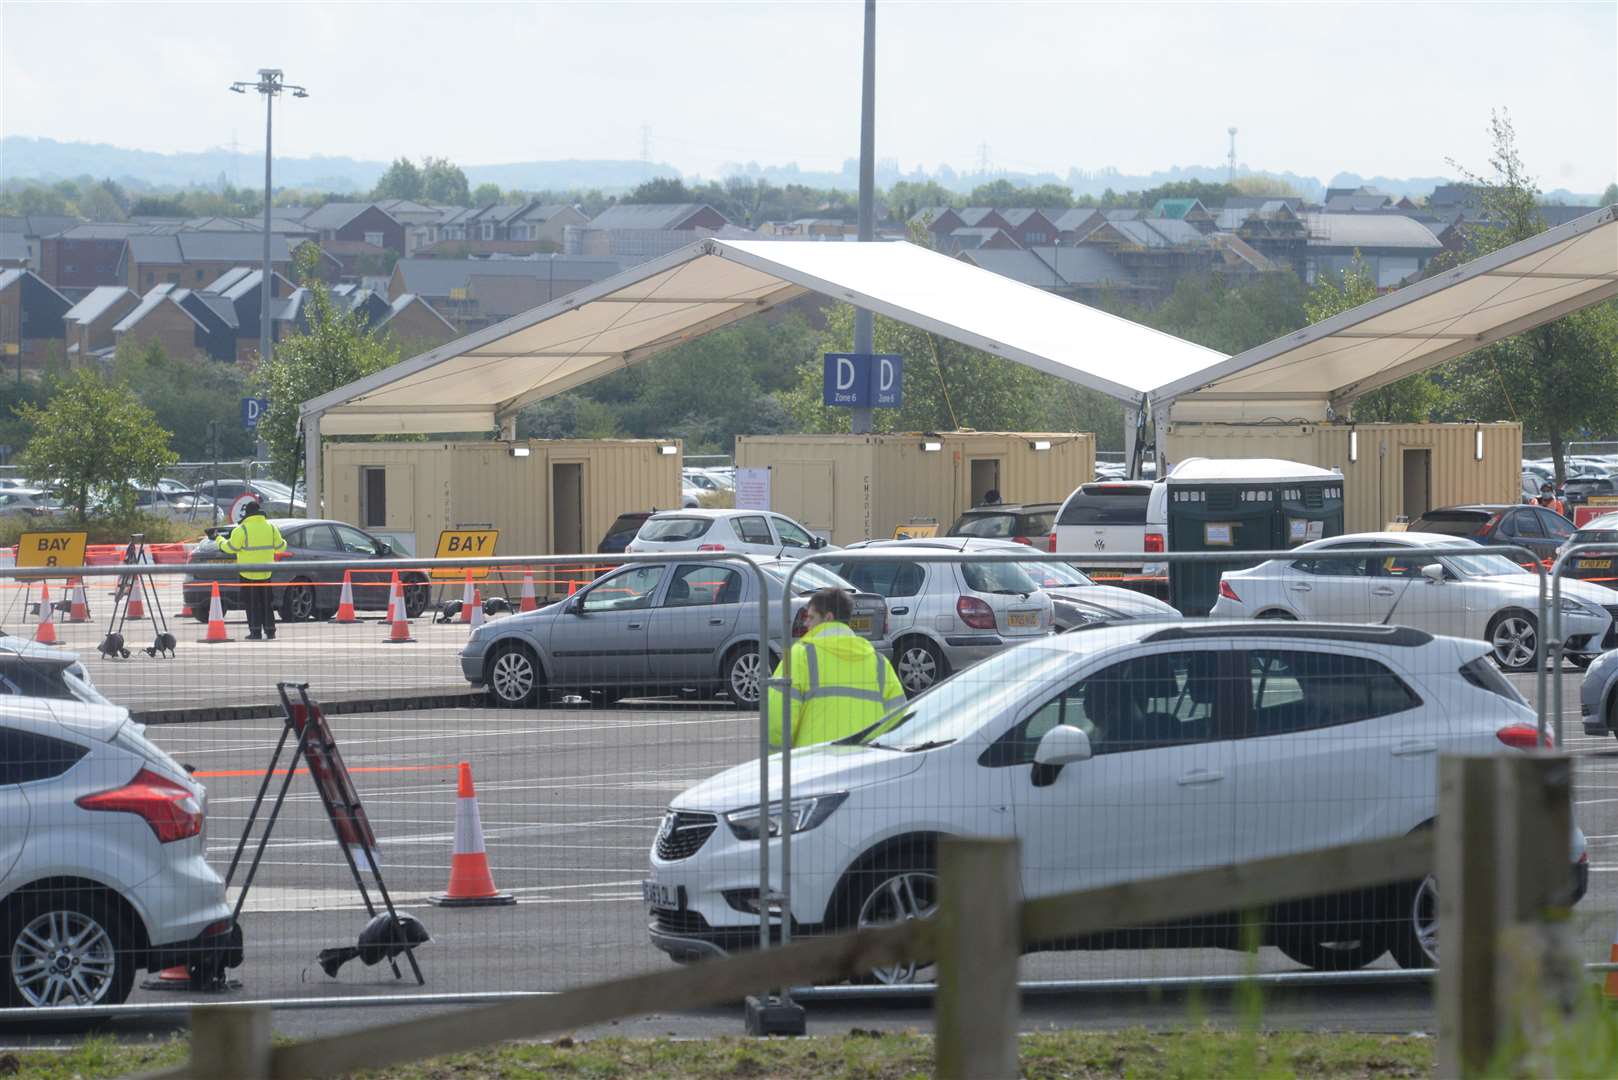 The coronavirus testing centre set up in one of the car parks at Ebbsfleet International. Picture: Chris Davey